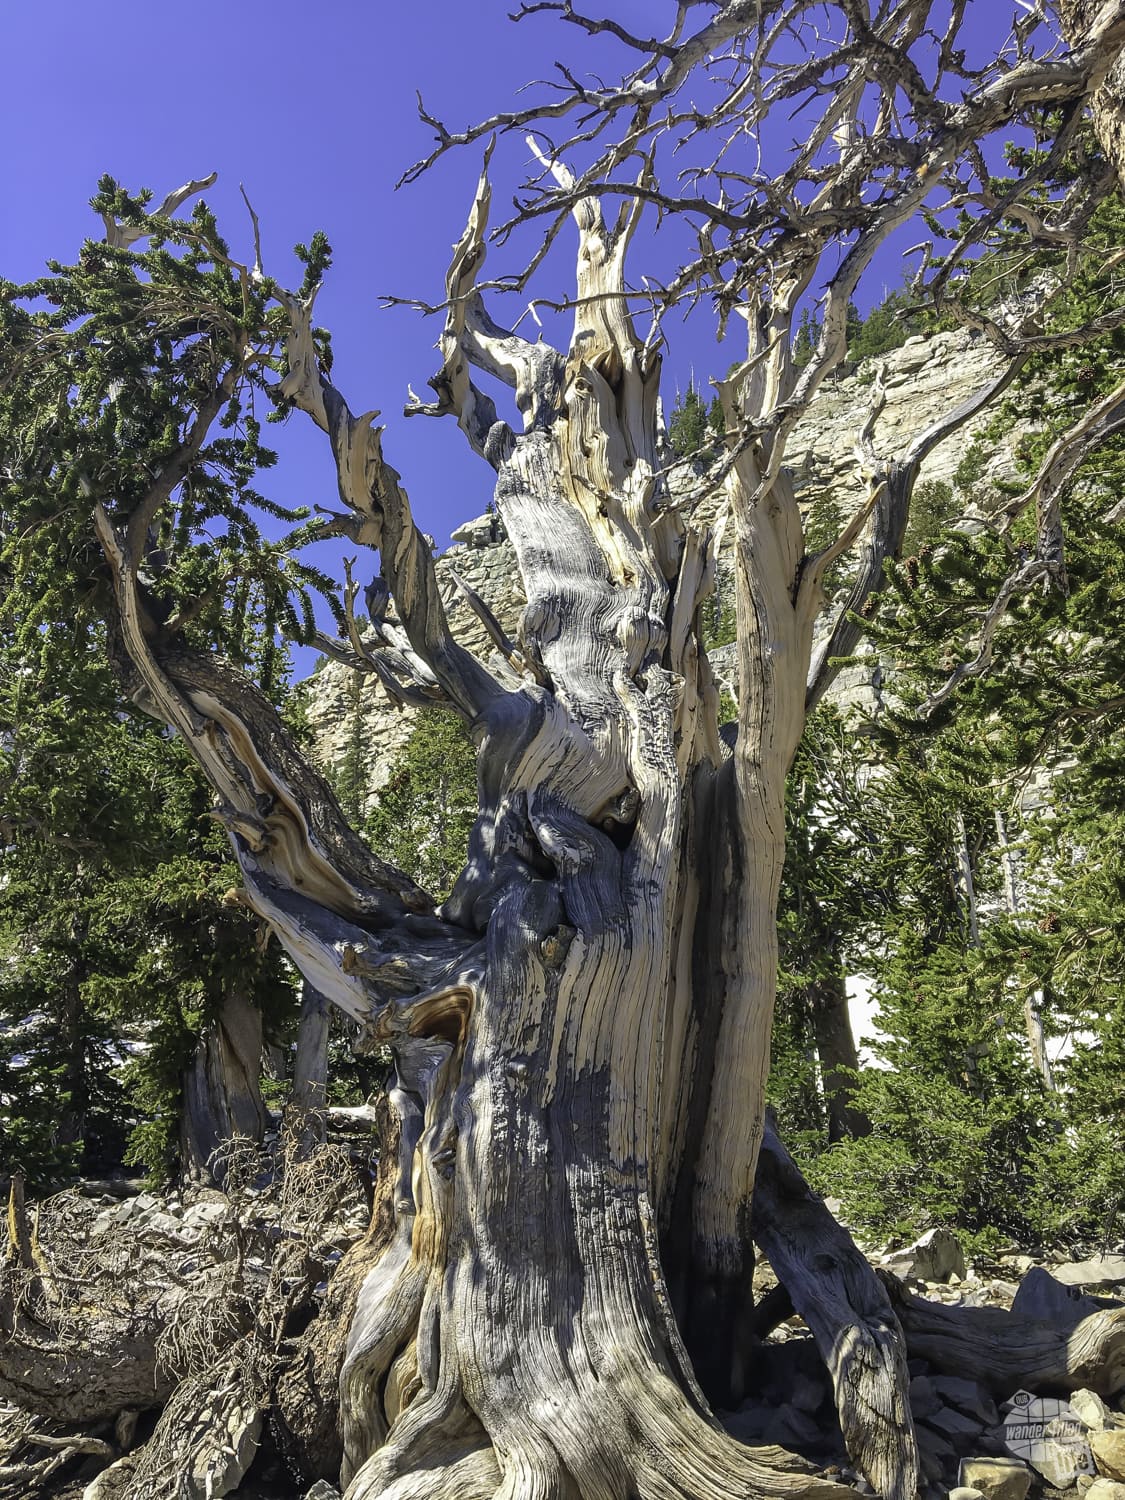 One of the oldest trees at Great Basin NP.